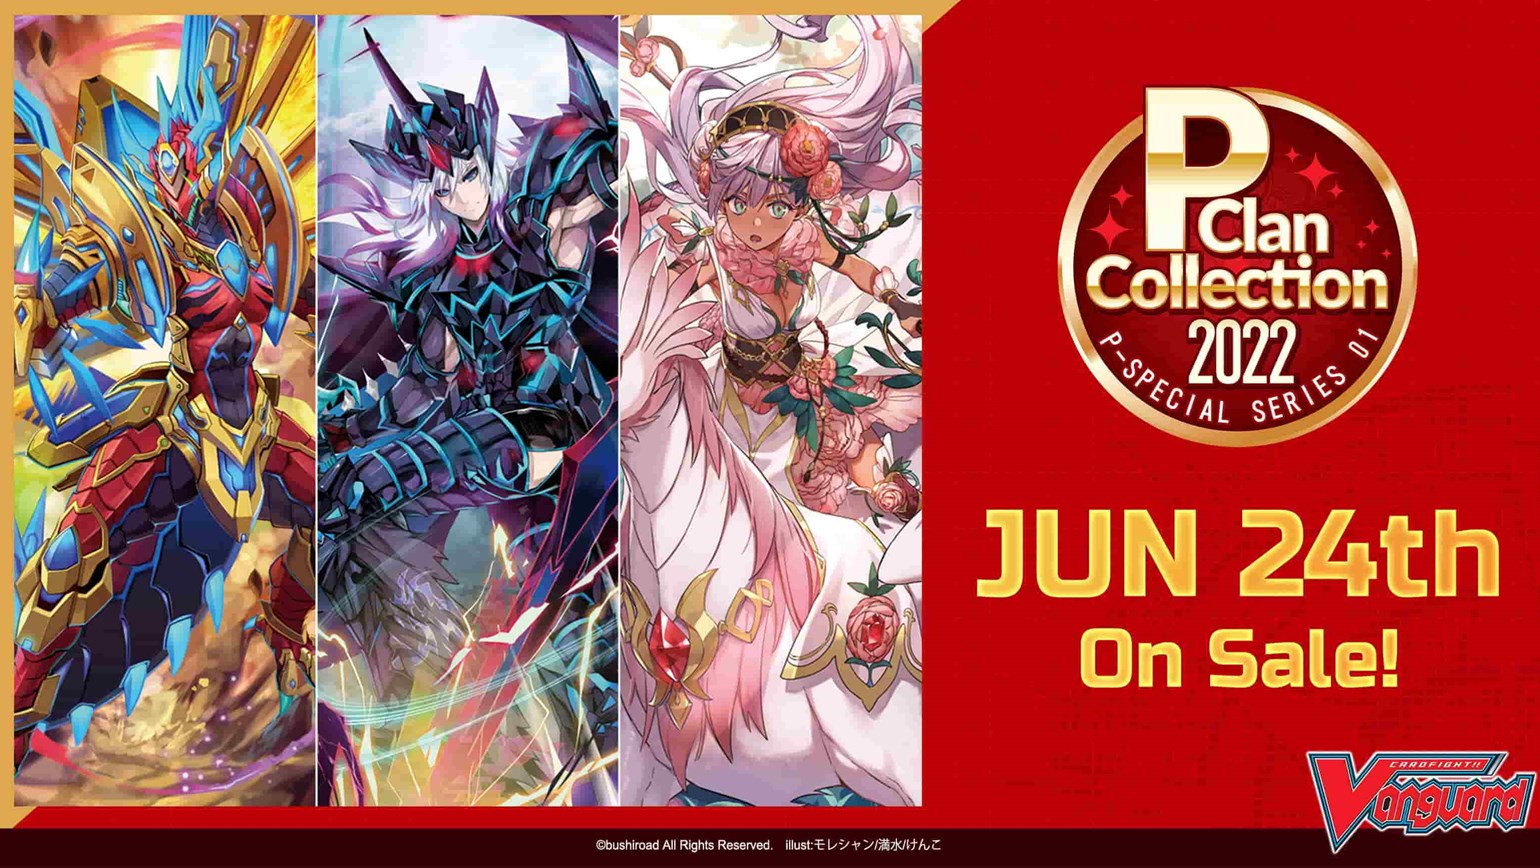 Are you ready to up your Premium game in 2022? Cardfight!! Vanguard P-Special Series 01: P Clan Collection 2022, coming to stores on June 24th!